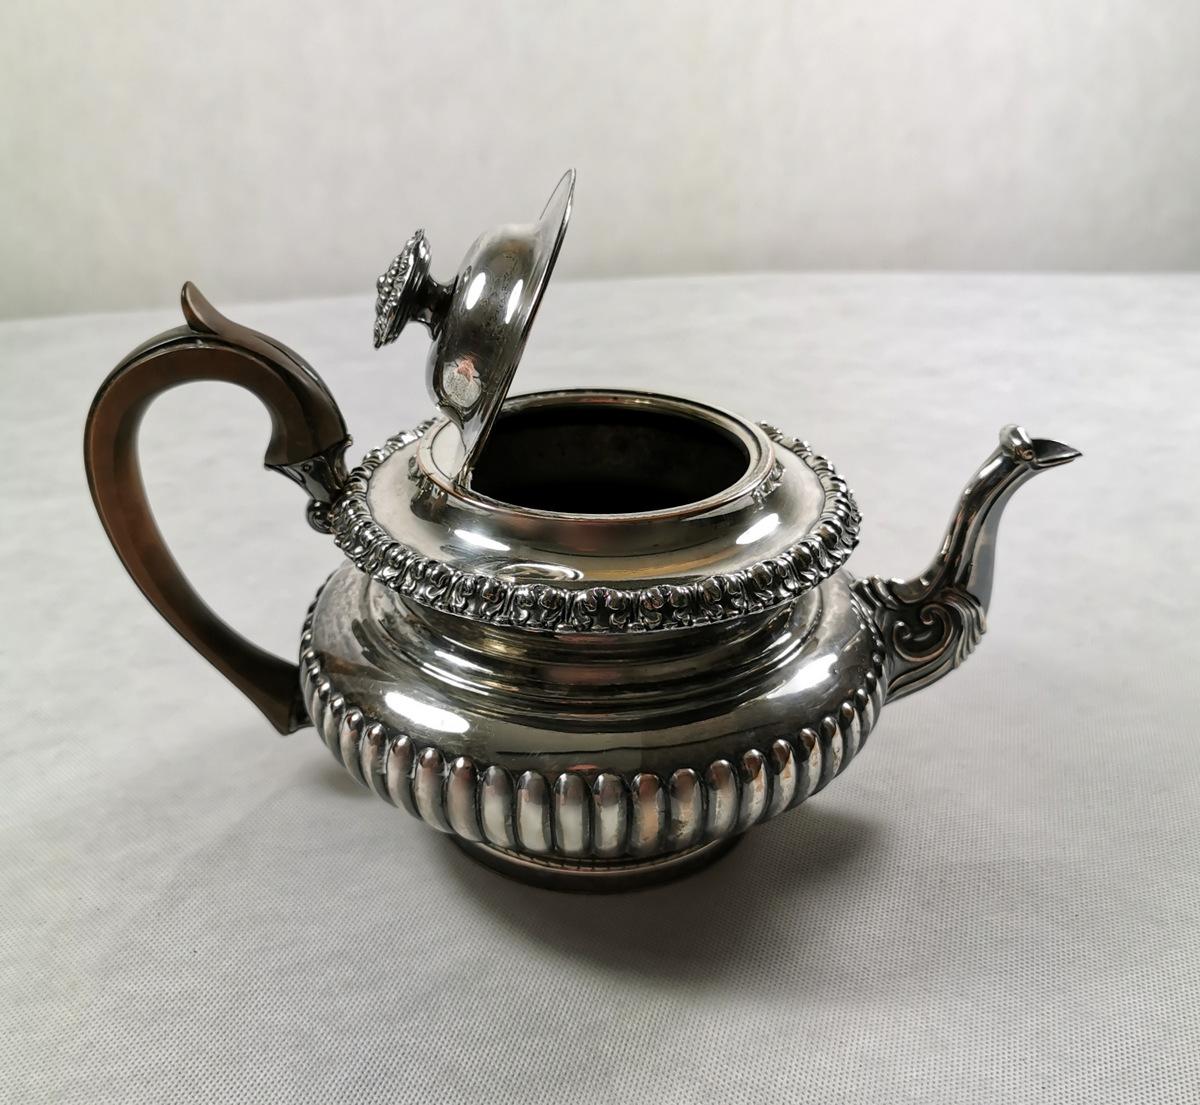 We kindly suggest you read the whole description, because with it we try to give you detailed technical and historical information to guarantee the authenticity of our objects.
Pretty and tasteful teapot in old Sheffield plate, the body is chiseled